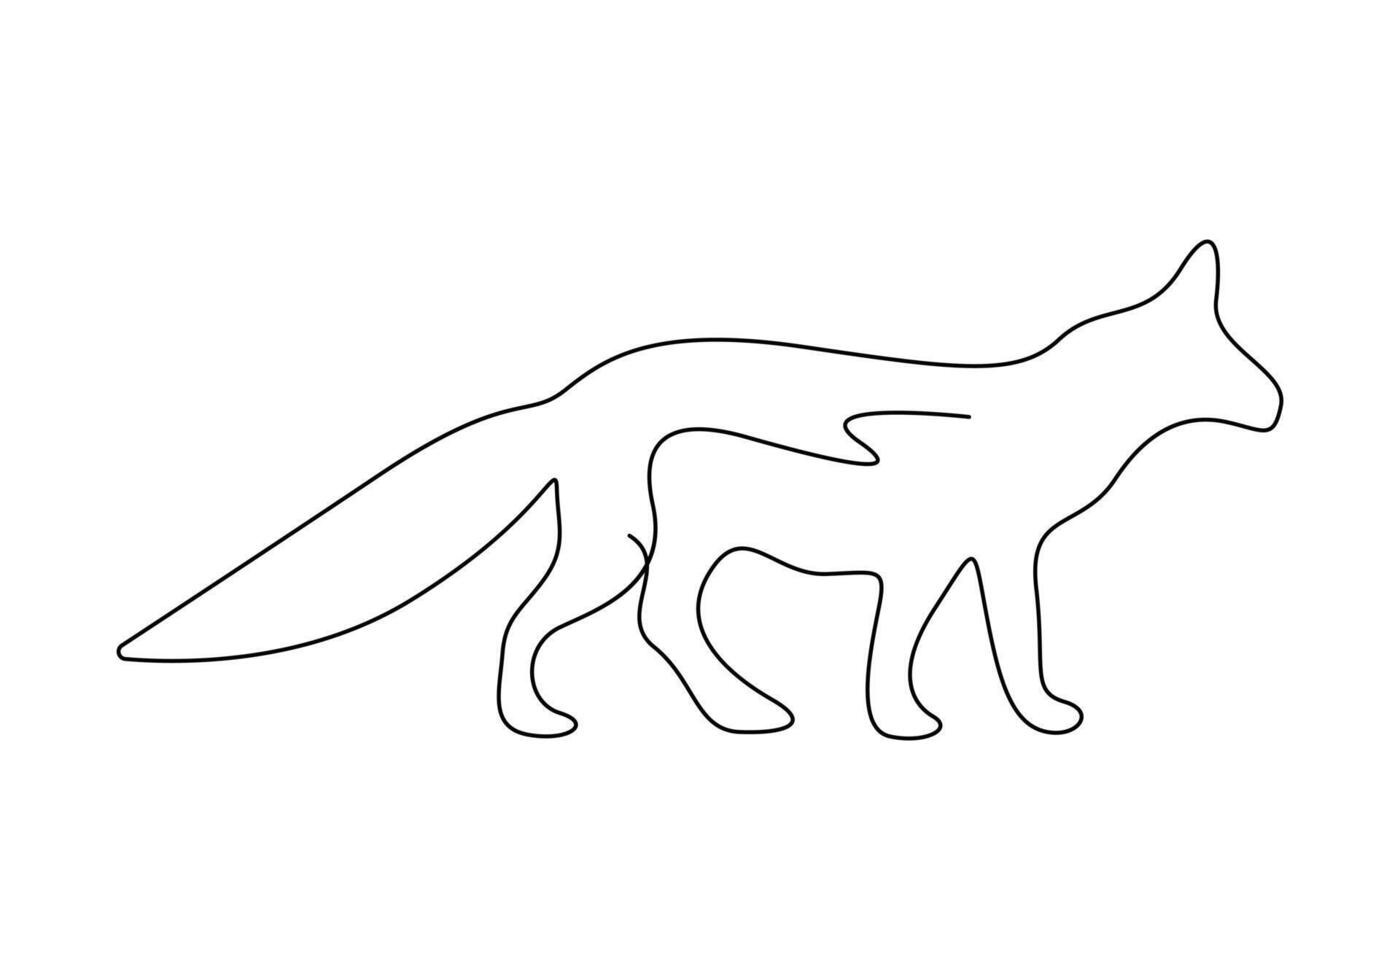 Continuous one line drawing of cute fox vector illustration